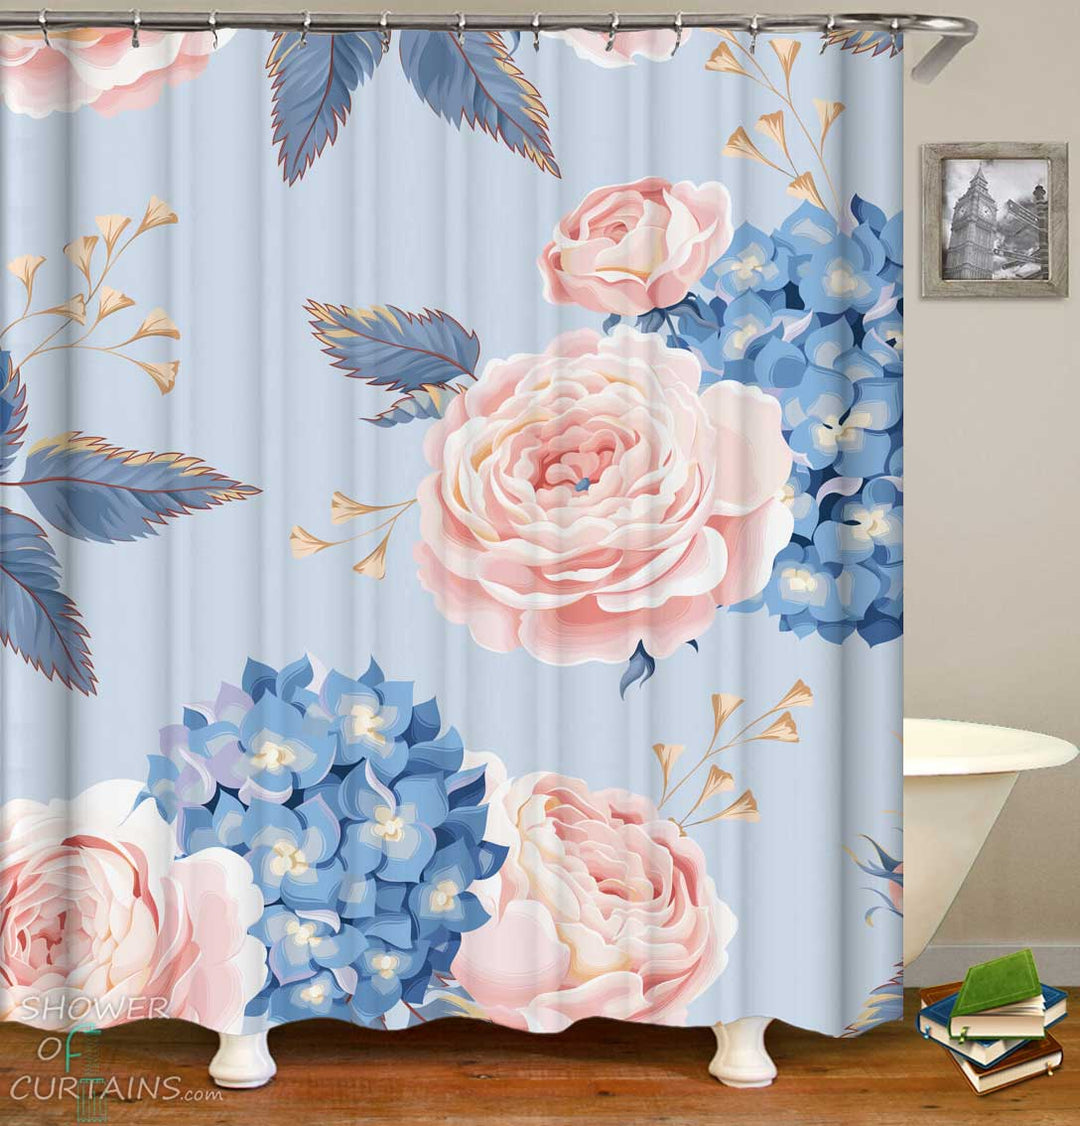 Shower Curtains with Bluish Pinkish Floral